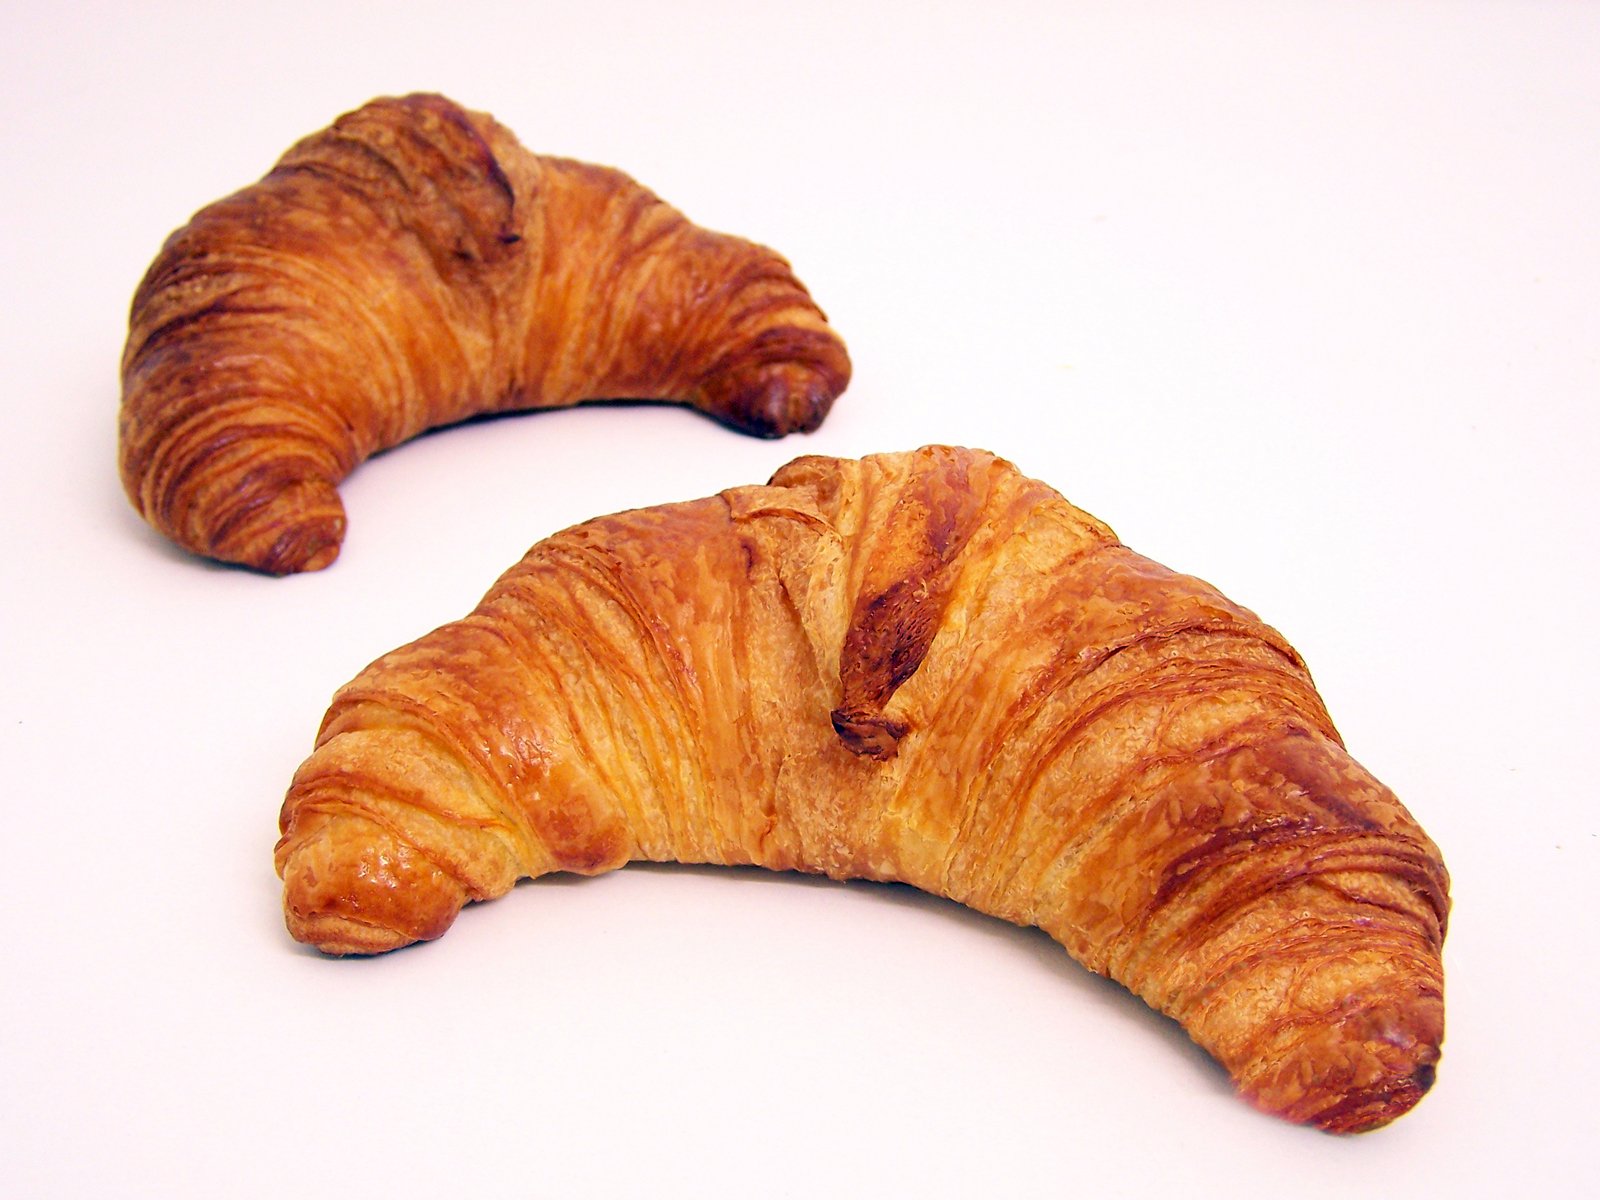 two croissants sitting next to each other on a table